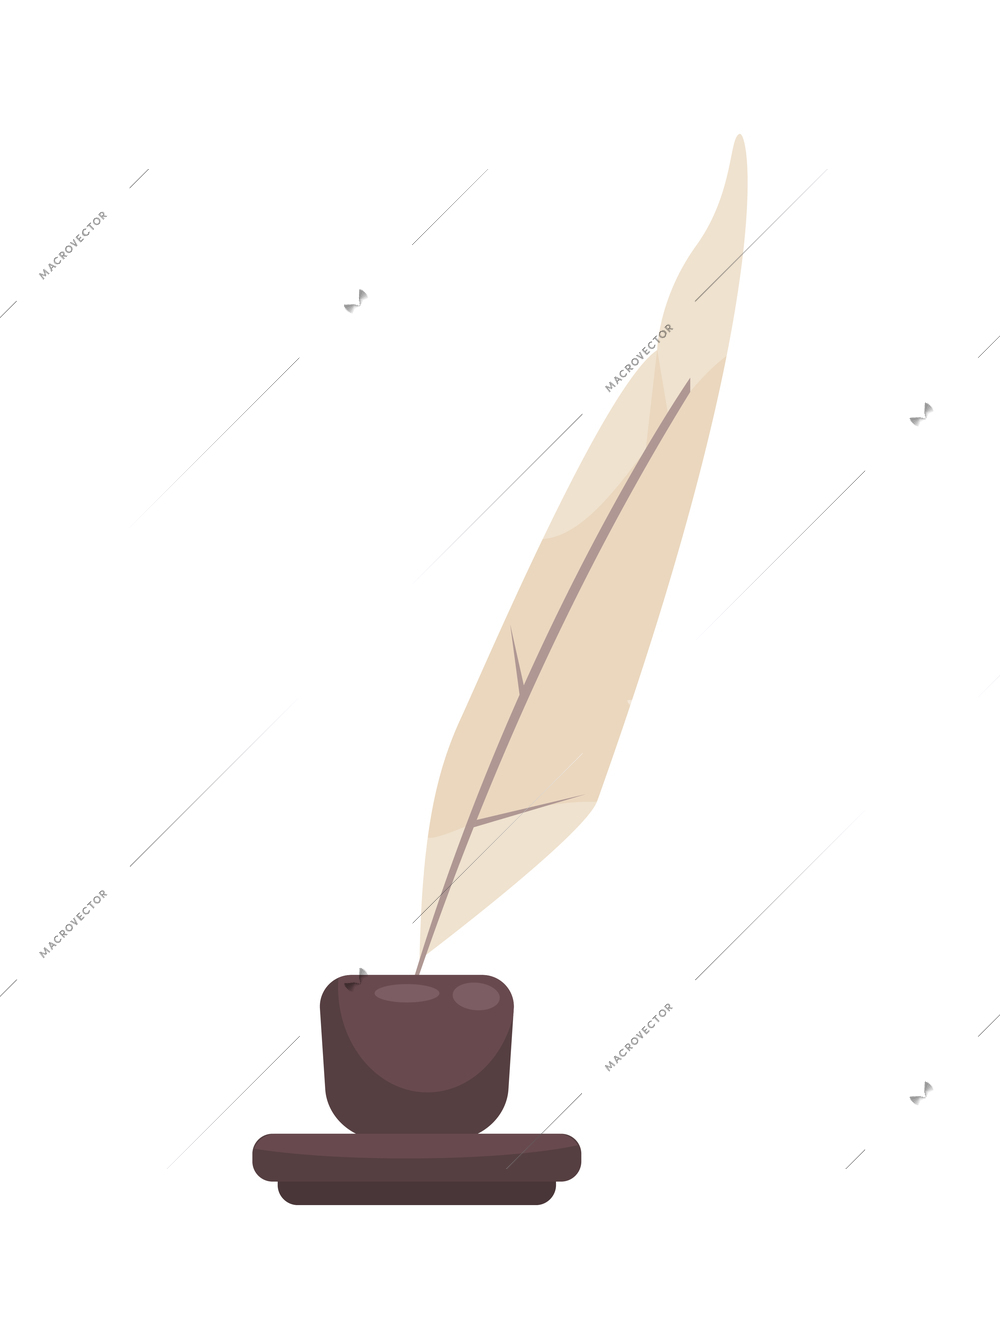 President workplace official residence composition with isolated image of feather pen in inkstand vector illustration